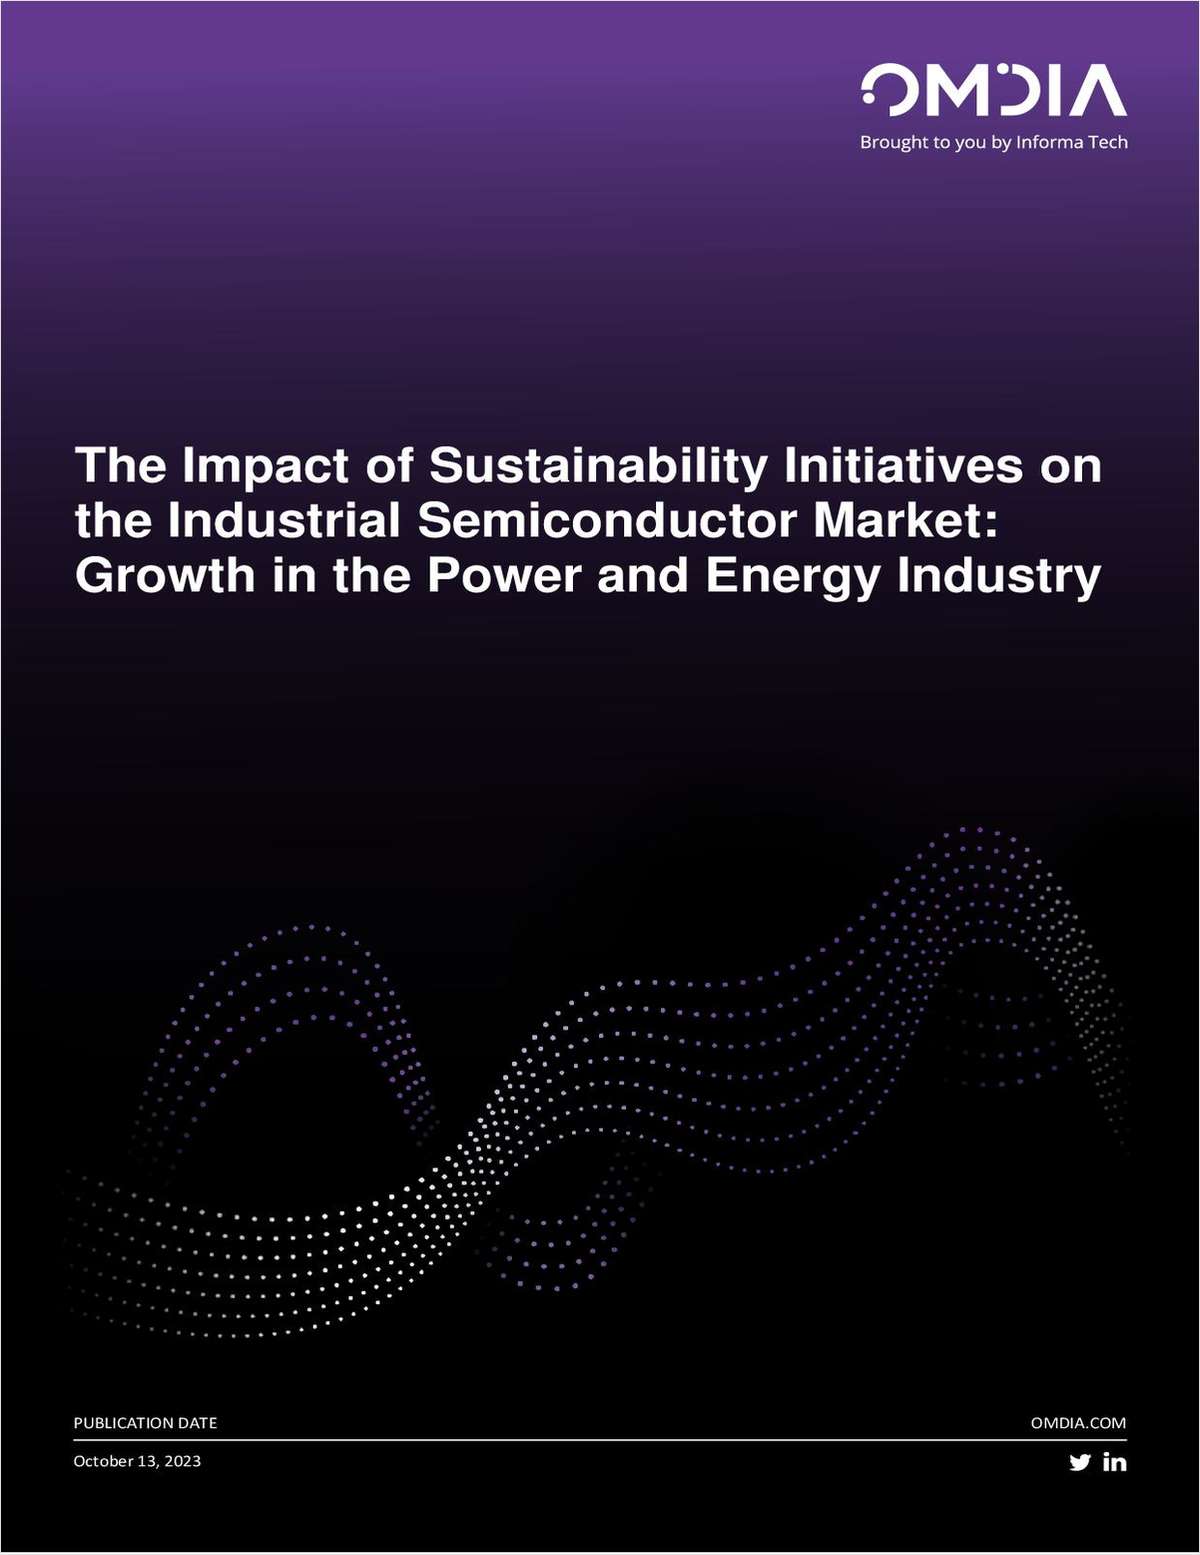 The Impact of Sustainability Initiatives on the Industrial Semiconductor Market: Growth in the Power and Energy Industry